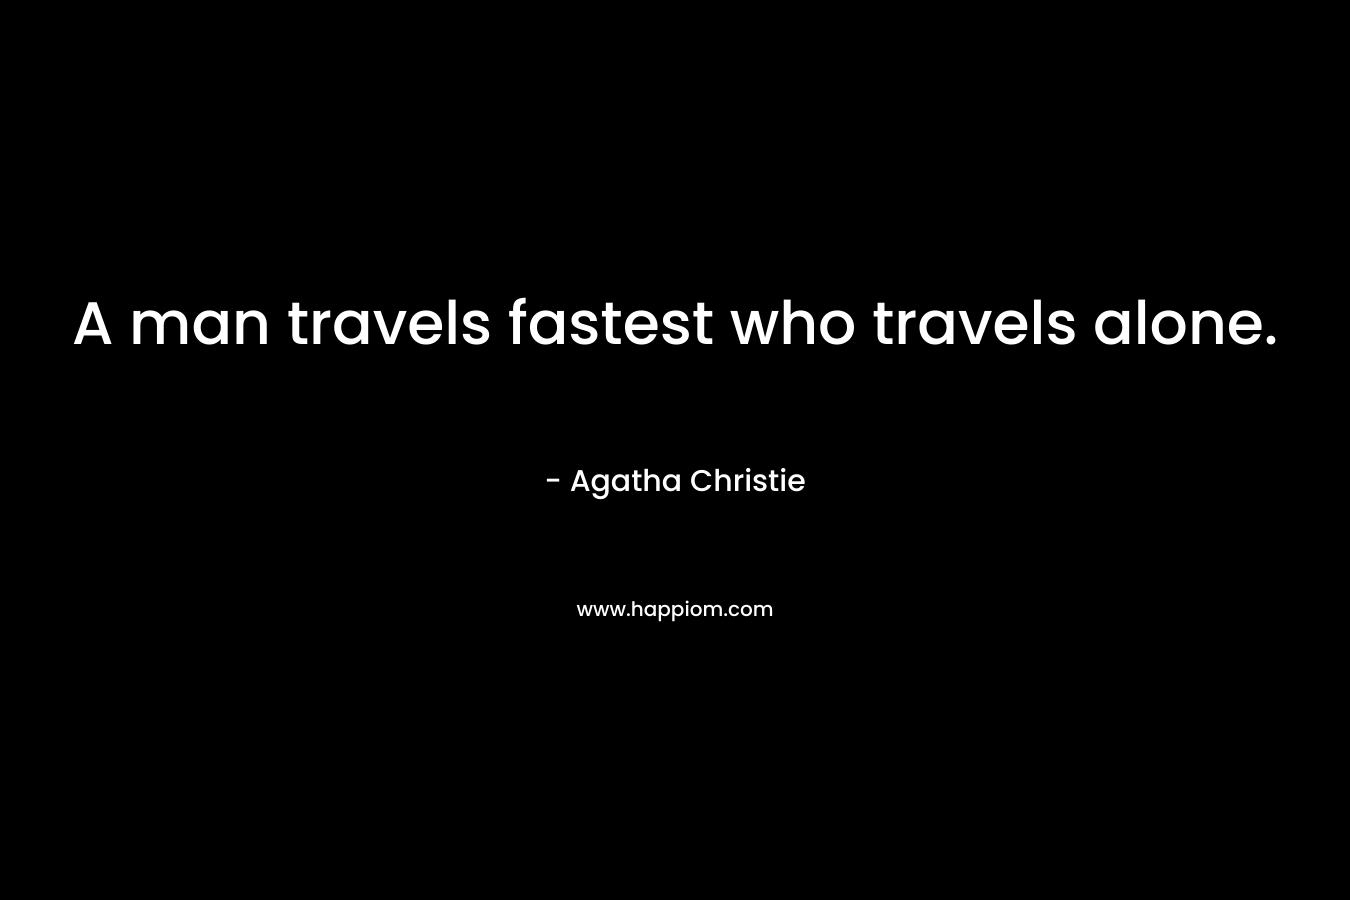 A man travels fastest who travels alone.